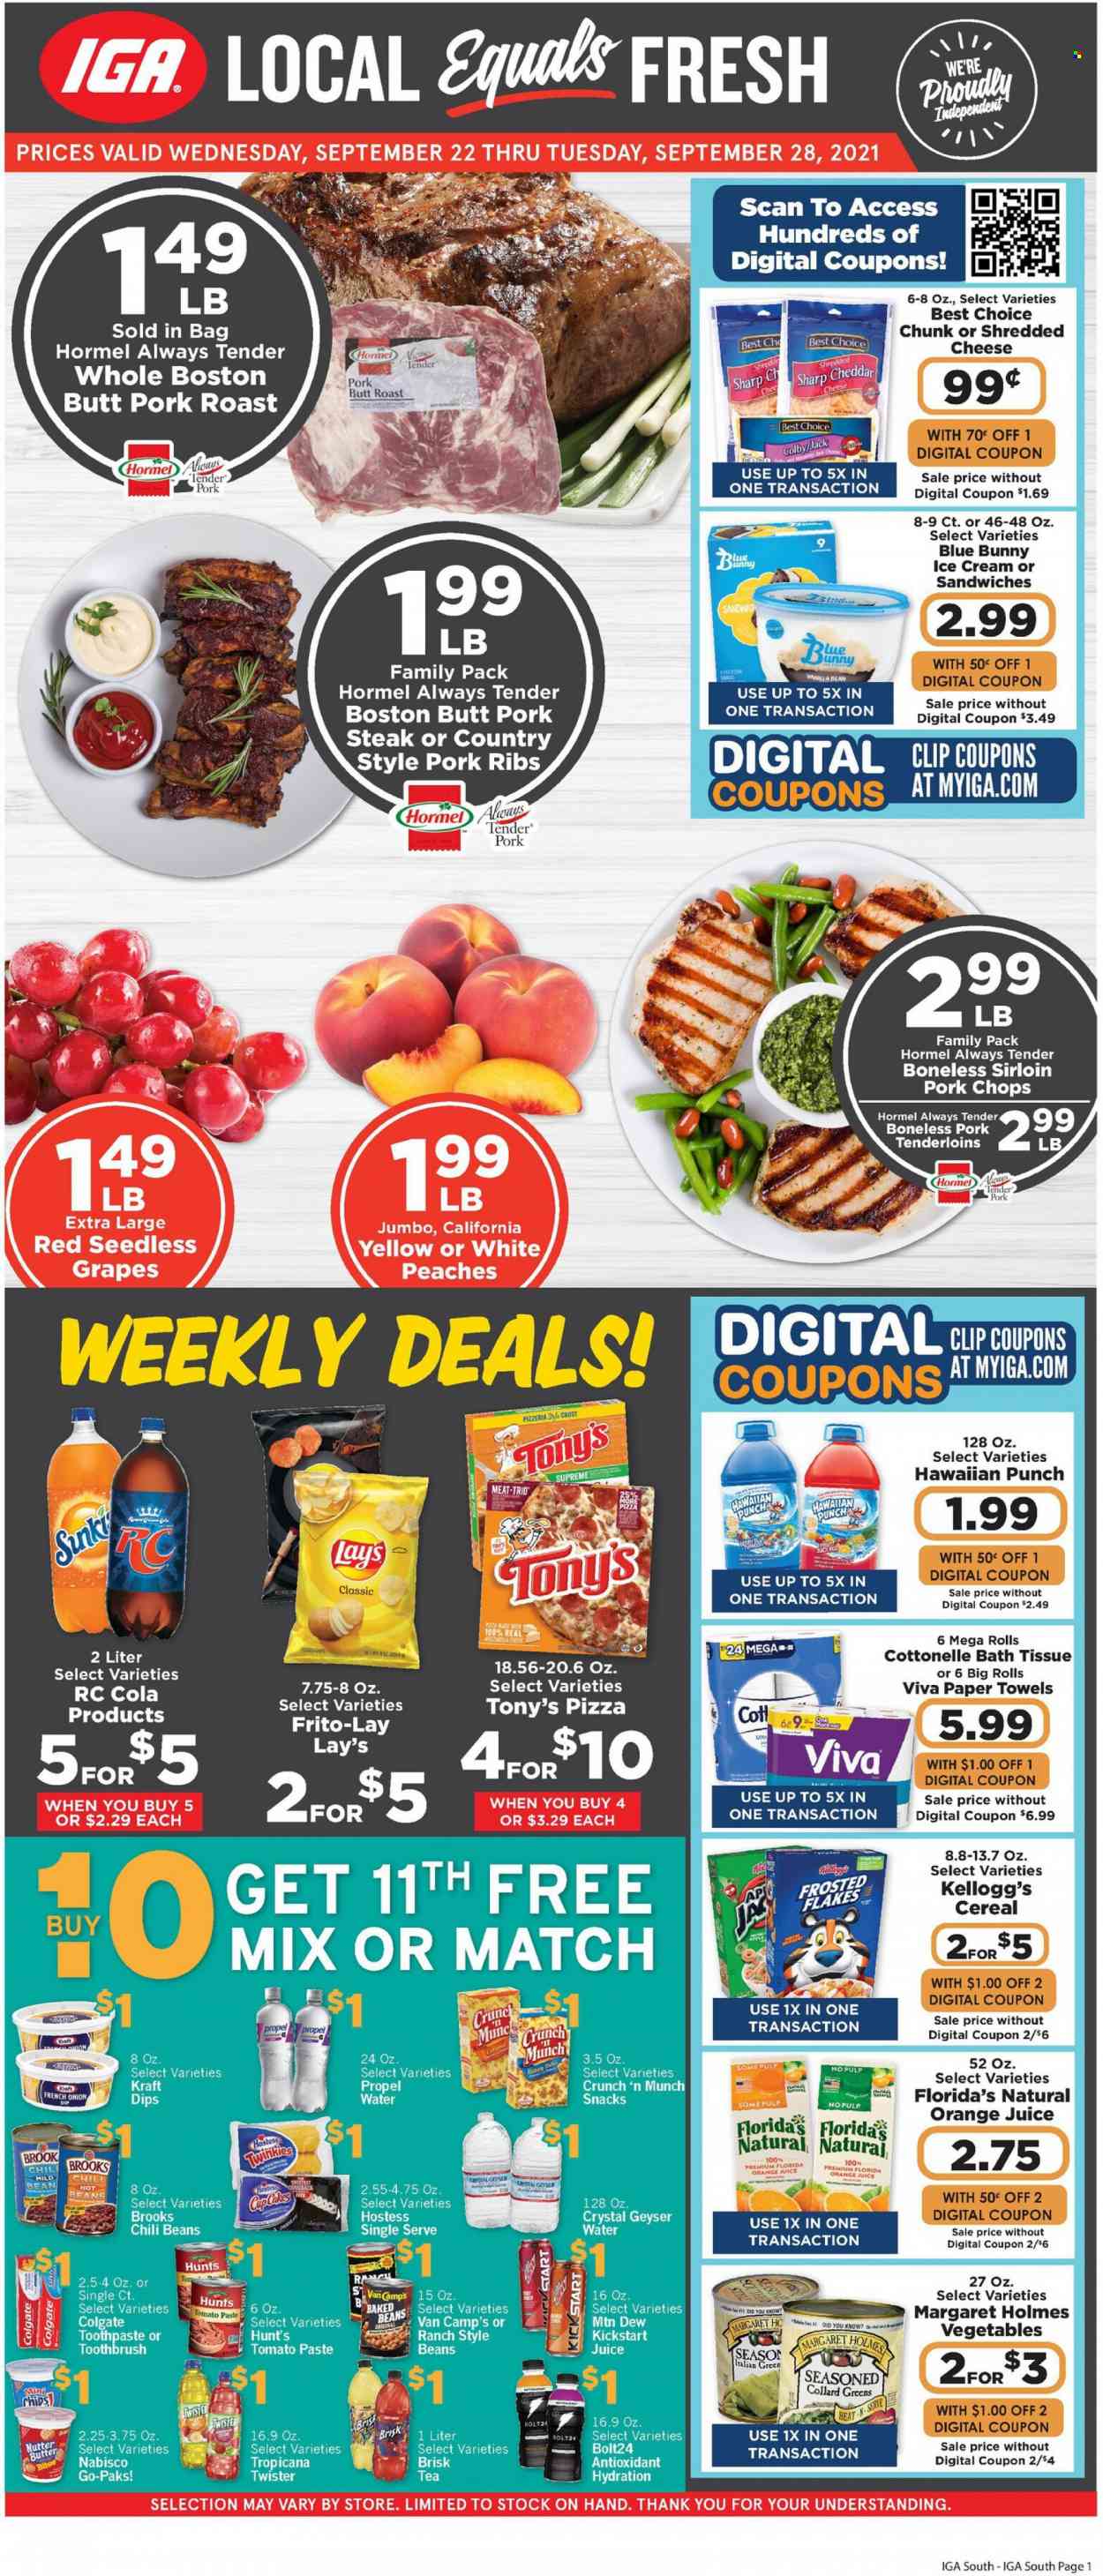 thumbnail - IGA Flyer - 09/22/2021 - 09/28/2021 - Sales products - seedless grapes, collard greens, onion, grapes, pizza, sandwich, Kraft®, Hormel, Colby cheese, shredded cheese, butter, dip, ice cream, Blue Bunny, snack, Kellogg's, Florida's Natural, chips, Lay’s, Frito-Lay, tomato paste, chili beans, baked beans, cereals, Frosted Flakes, Mountain Dew, orange juice, juice, tea, steak, pork chops, pork meat, pork ribs, pork roast, pork tenderloin, bath tissue, Cottonelle, kitchen towels, paper towels, Colgate, toothbrush, toothpaste, cup, peaches. Page 1.